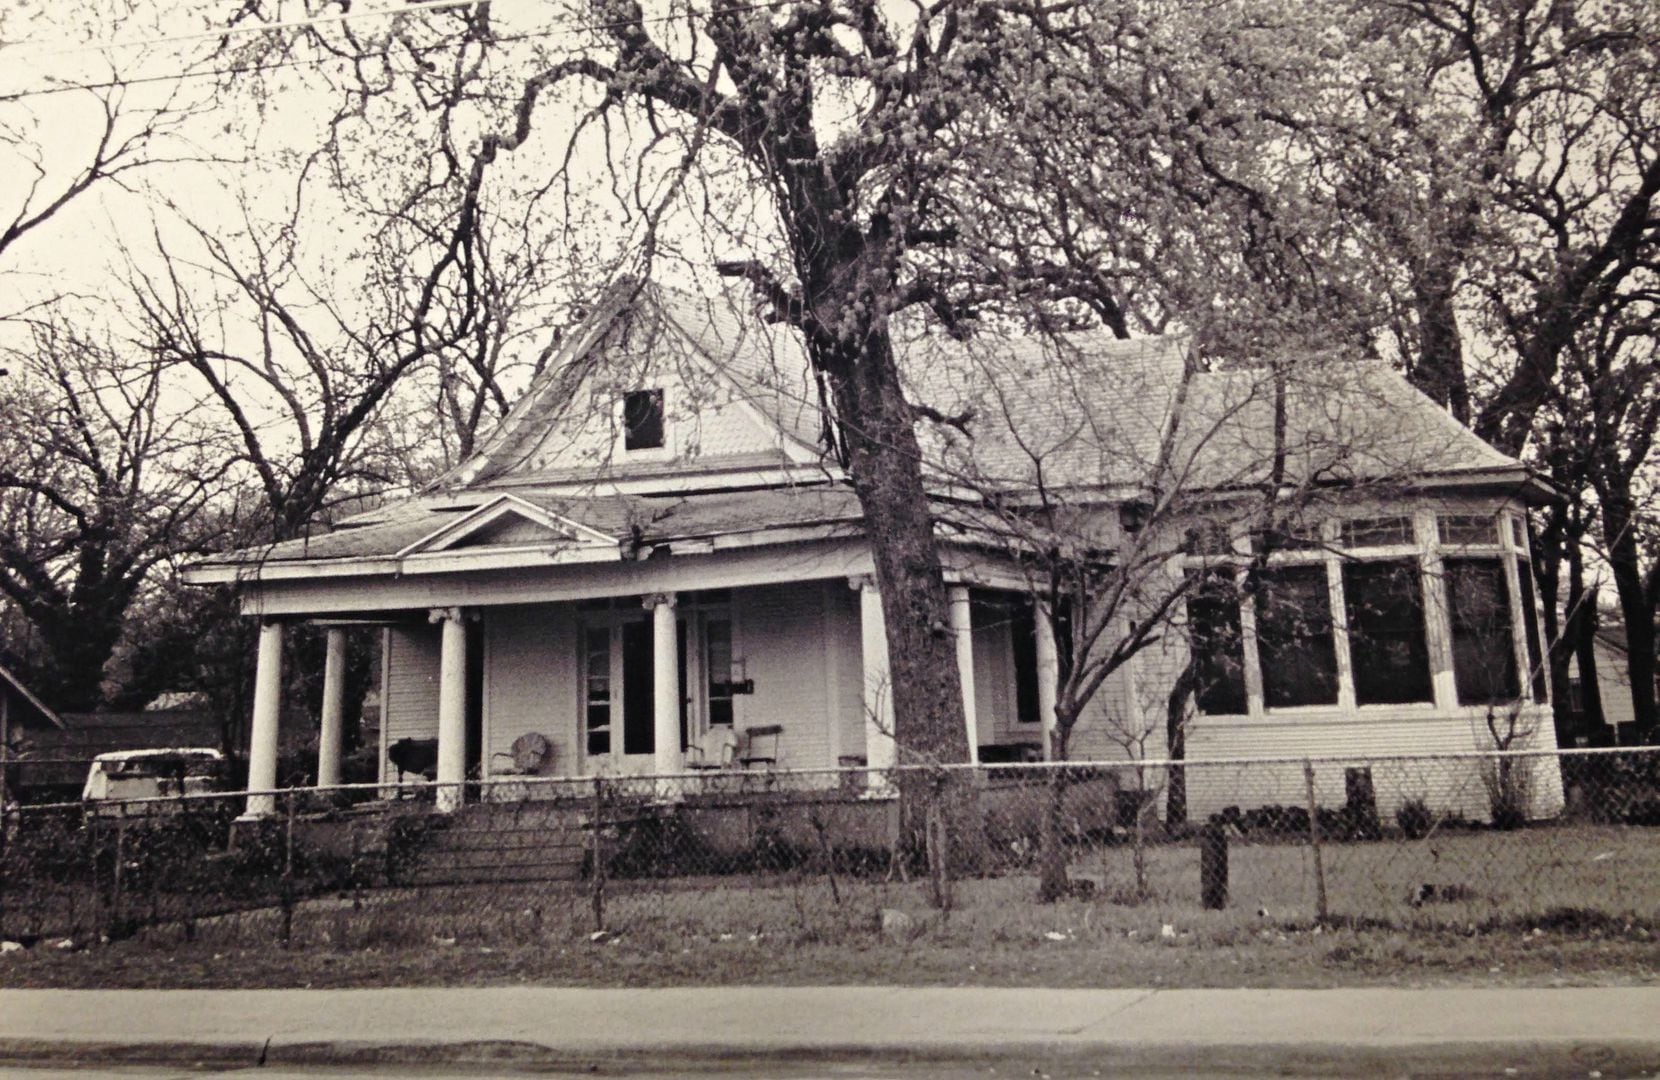 An undated photo of 2426 Pine St. in South Dallas, which no longer exists except as a...